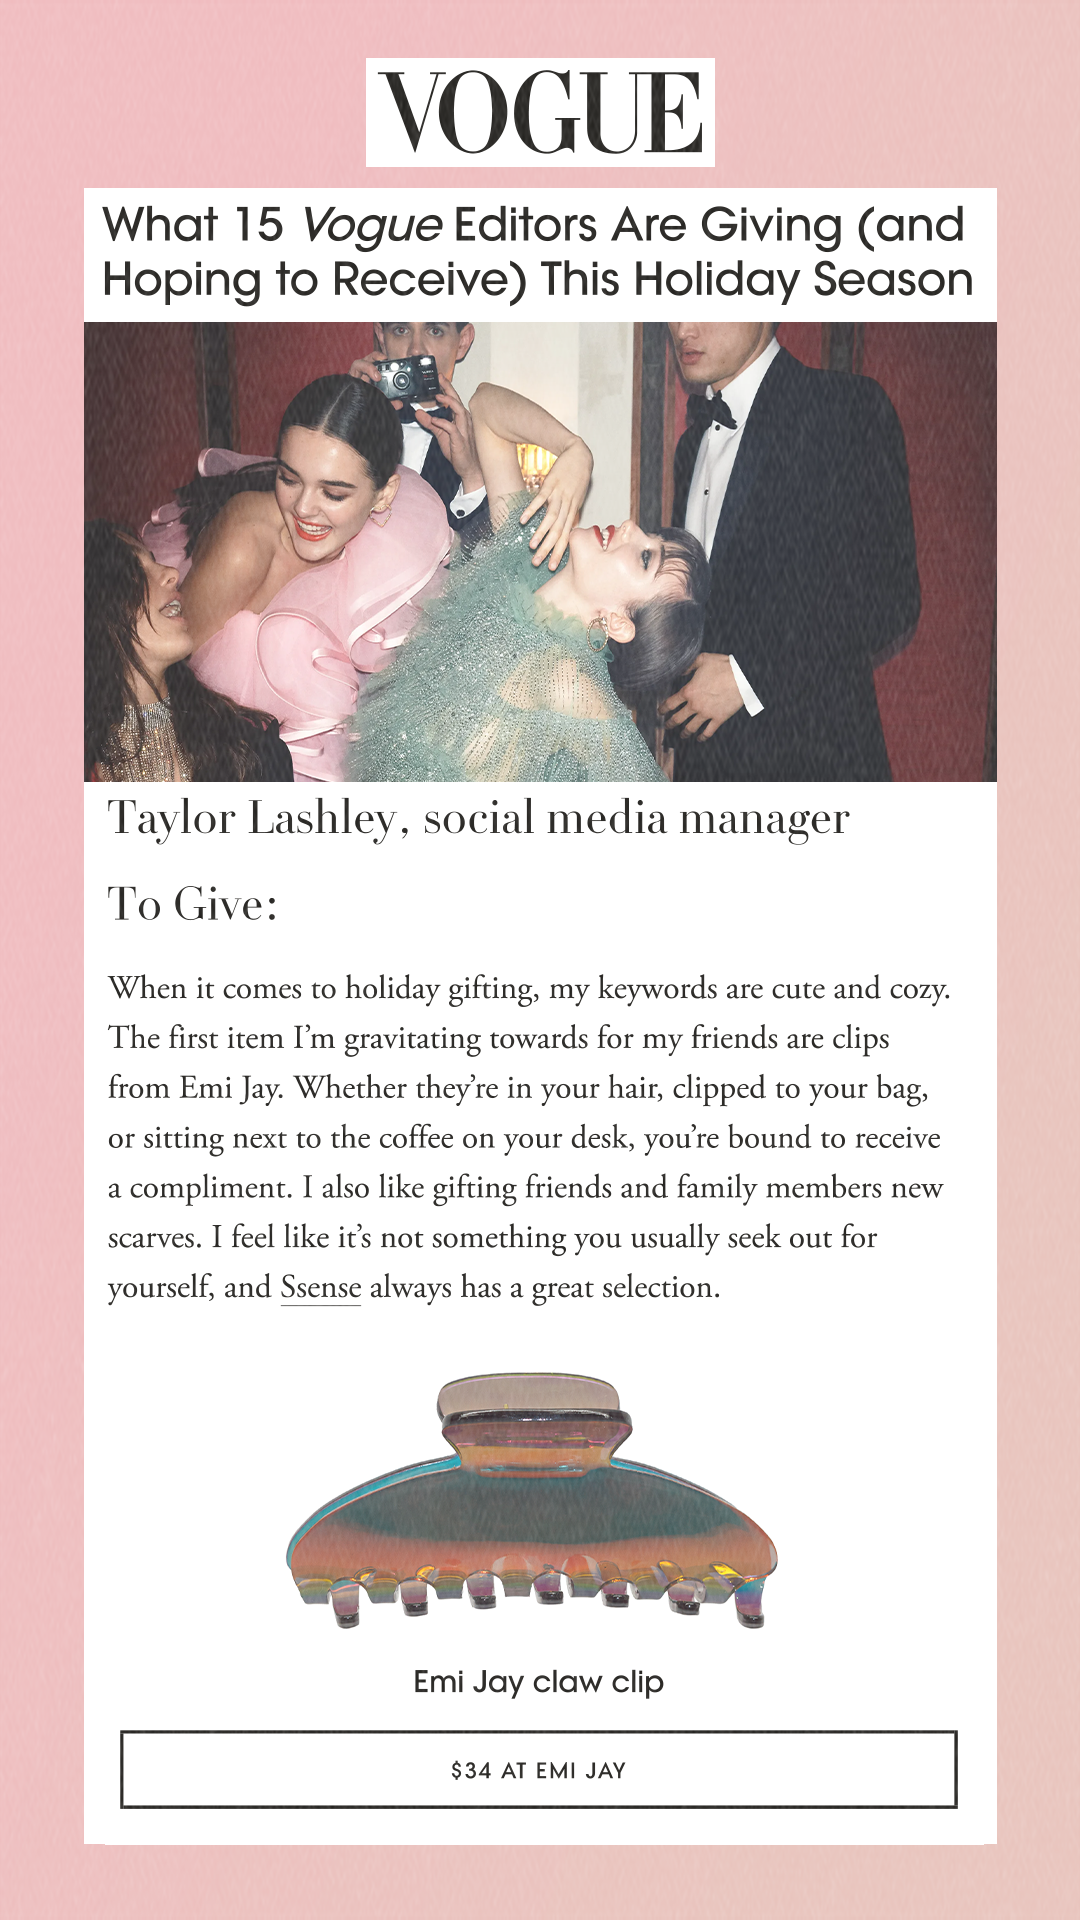 What 15 Vogue Editors Are Giving (and Hoping to Receive) This Holiday Season Taylor Lashley, social media manager To Give: When it comes to holiday gifting, my keywords are cute and cozy. The first item I’m gravitating towards for my friends are clips from Emi Jay. Whether they’re in your hair, clipped to your bag, or sitting next to the coffee on your desk, you’re bound to receive a compliment. I also like gifting friends and family members new scarves. I feel like it’s not something you usually seek out for yourself, and Ssense always has a great selection. Emi Jay claw clip $34 at EMI JAY